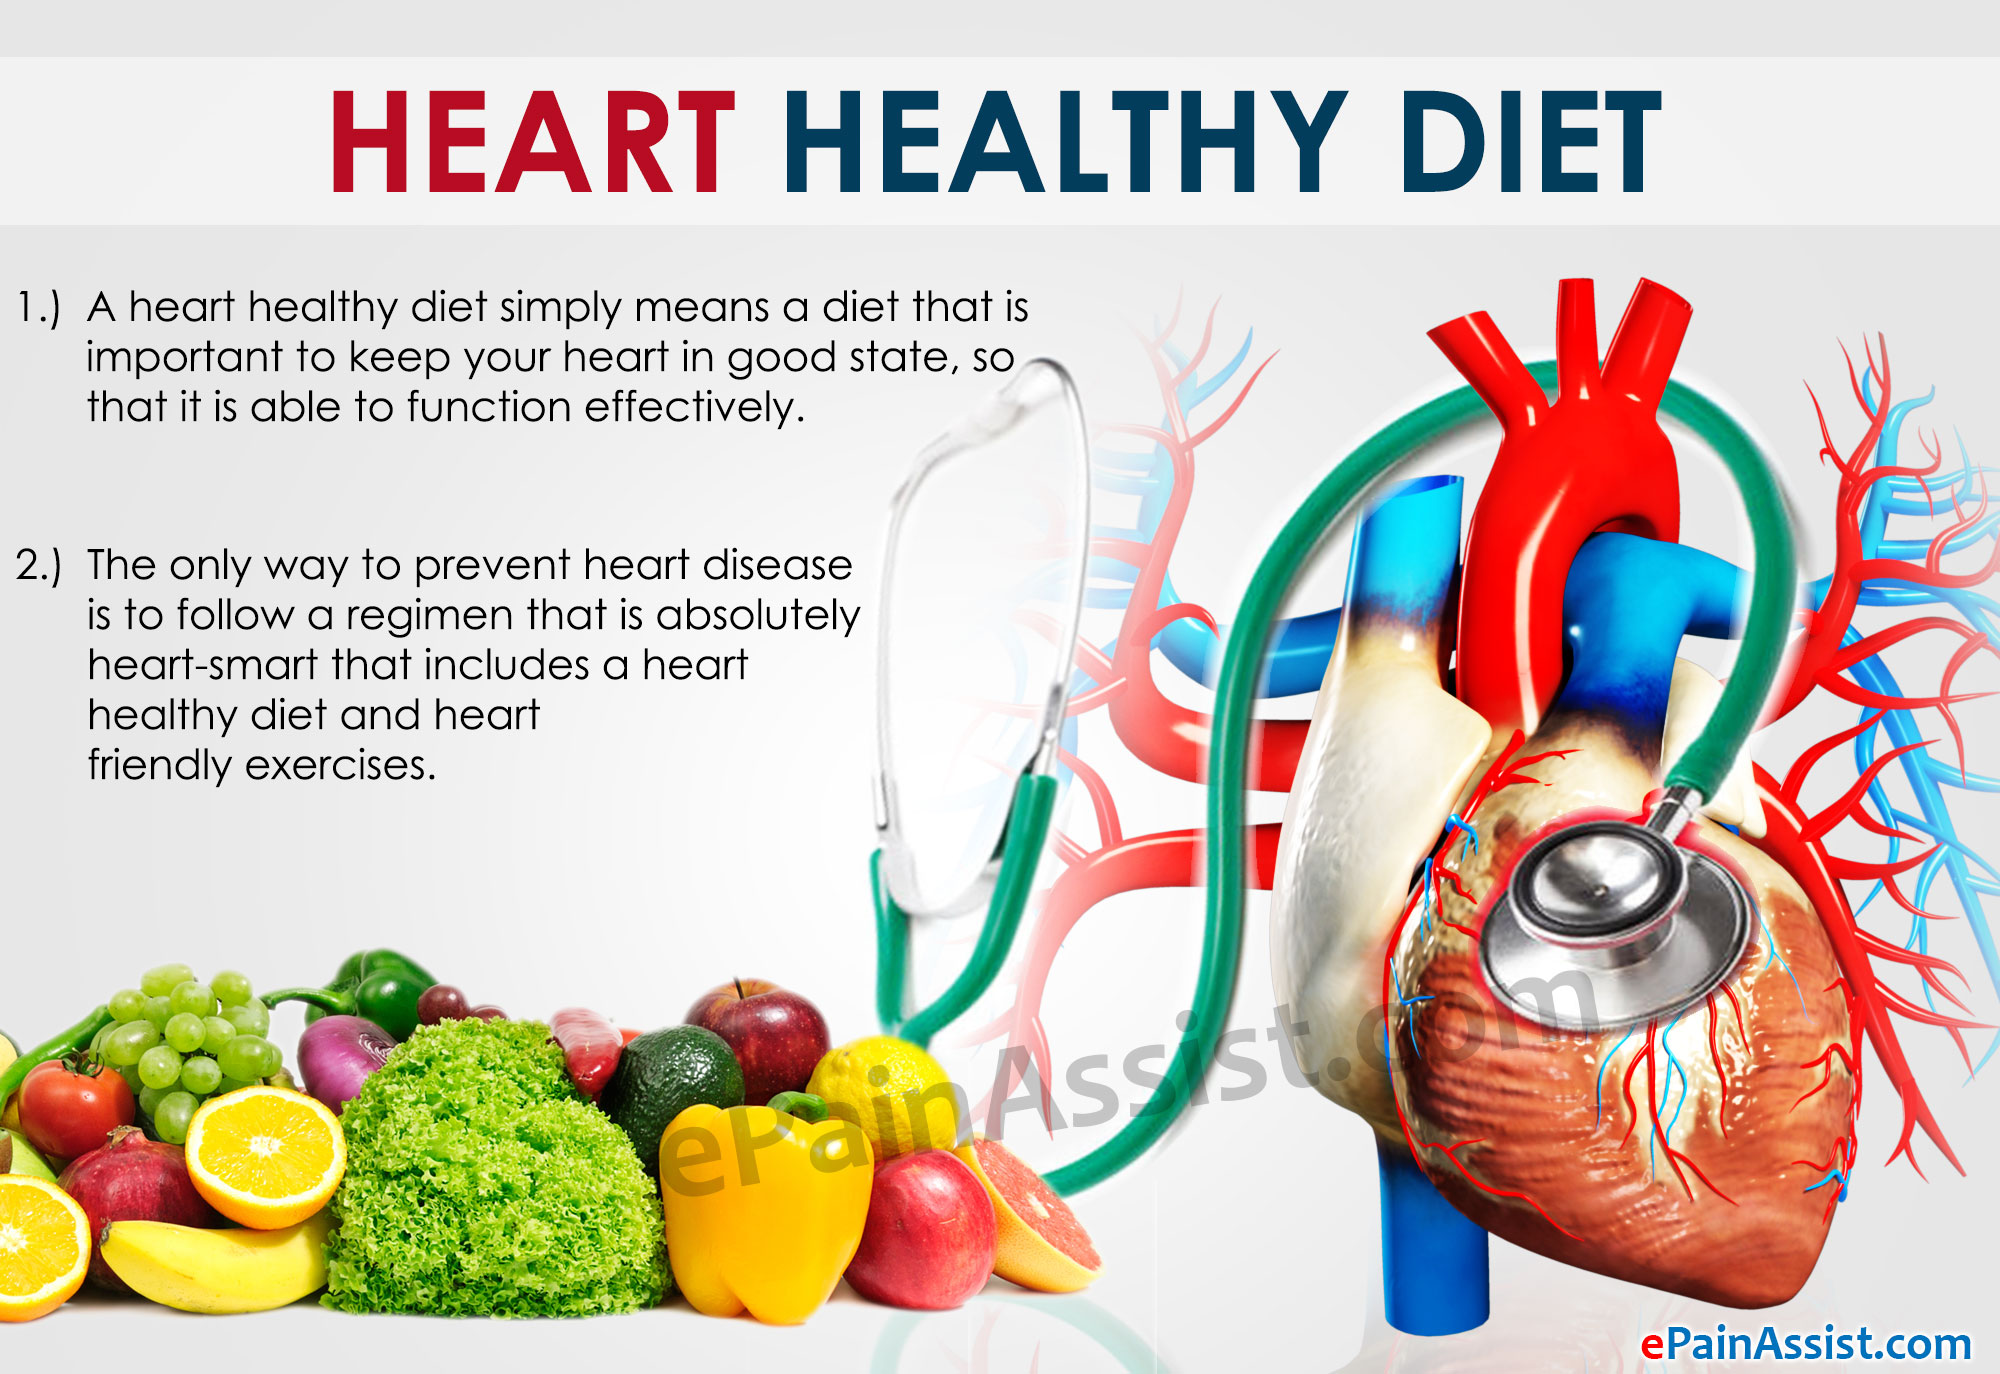 Heart Healthy Diet Menu Having A Healthy Diet Menu Without Fruit And Veggie Is Impossible